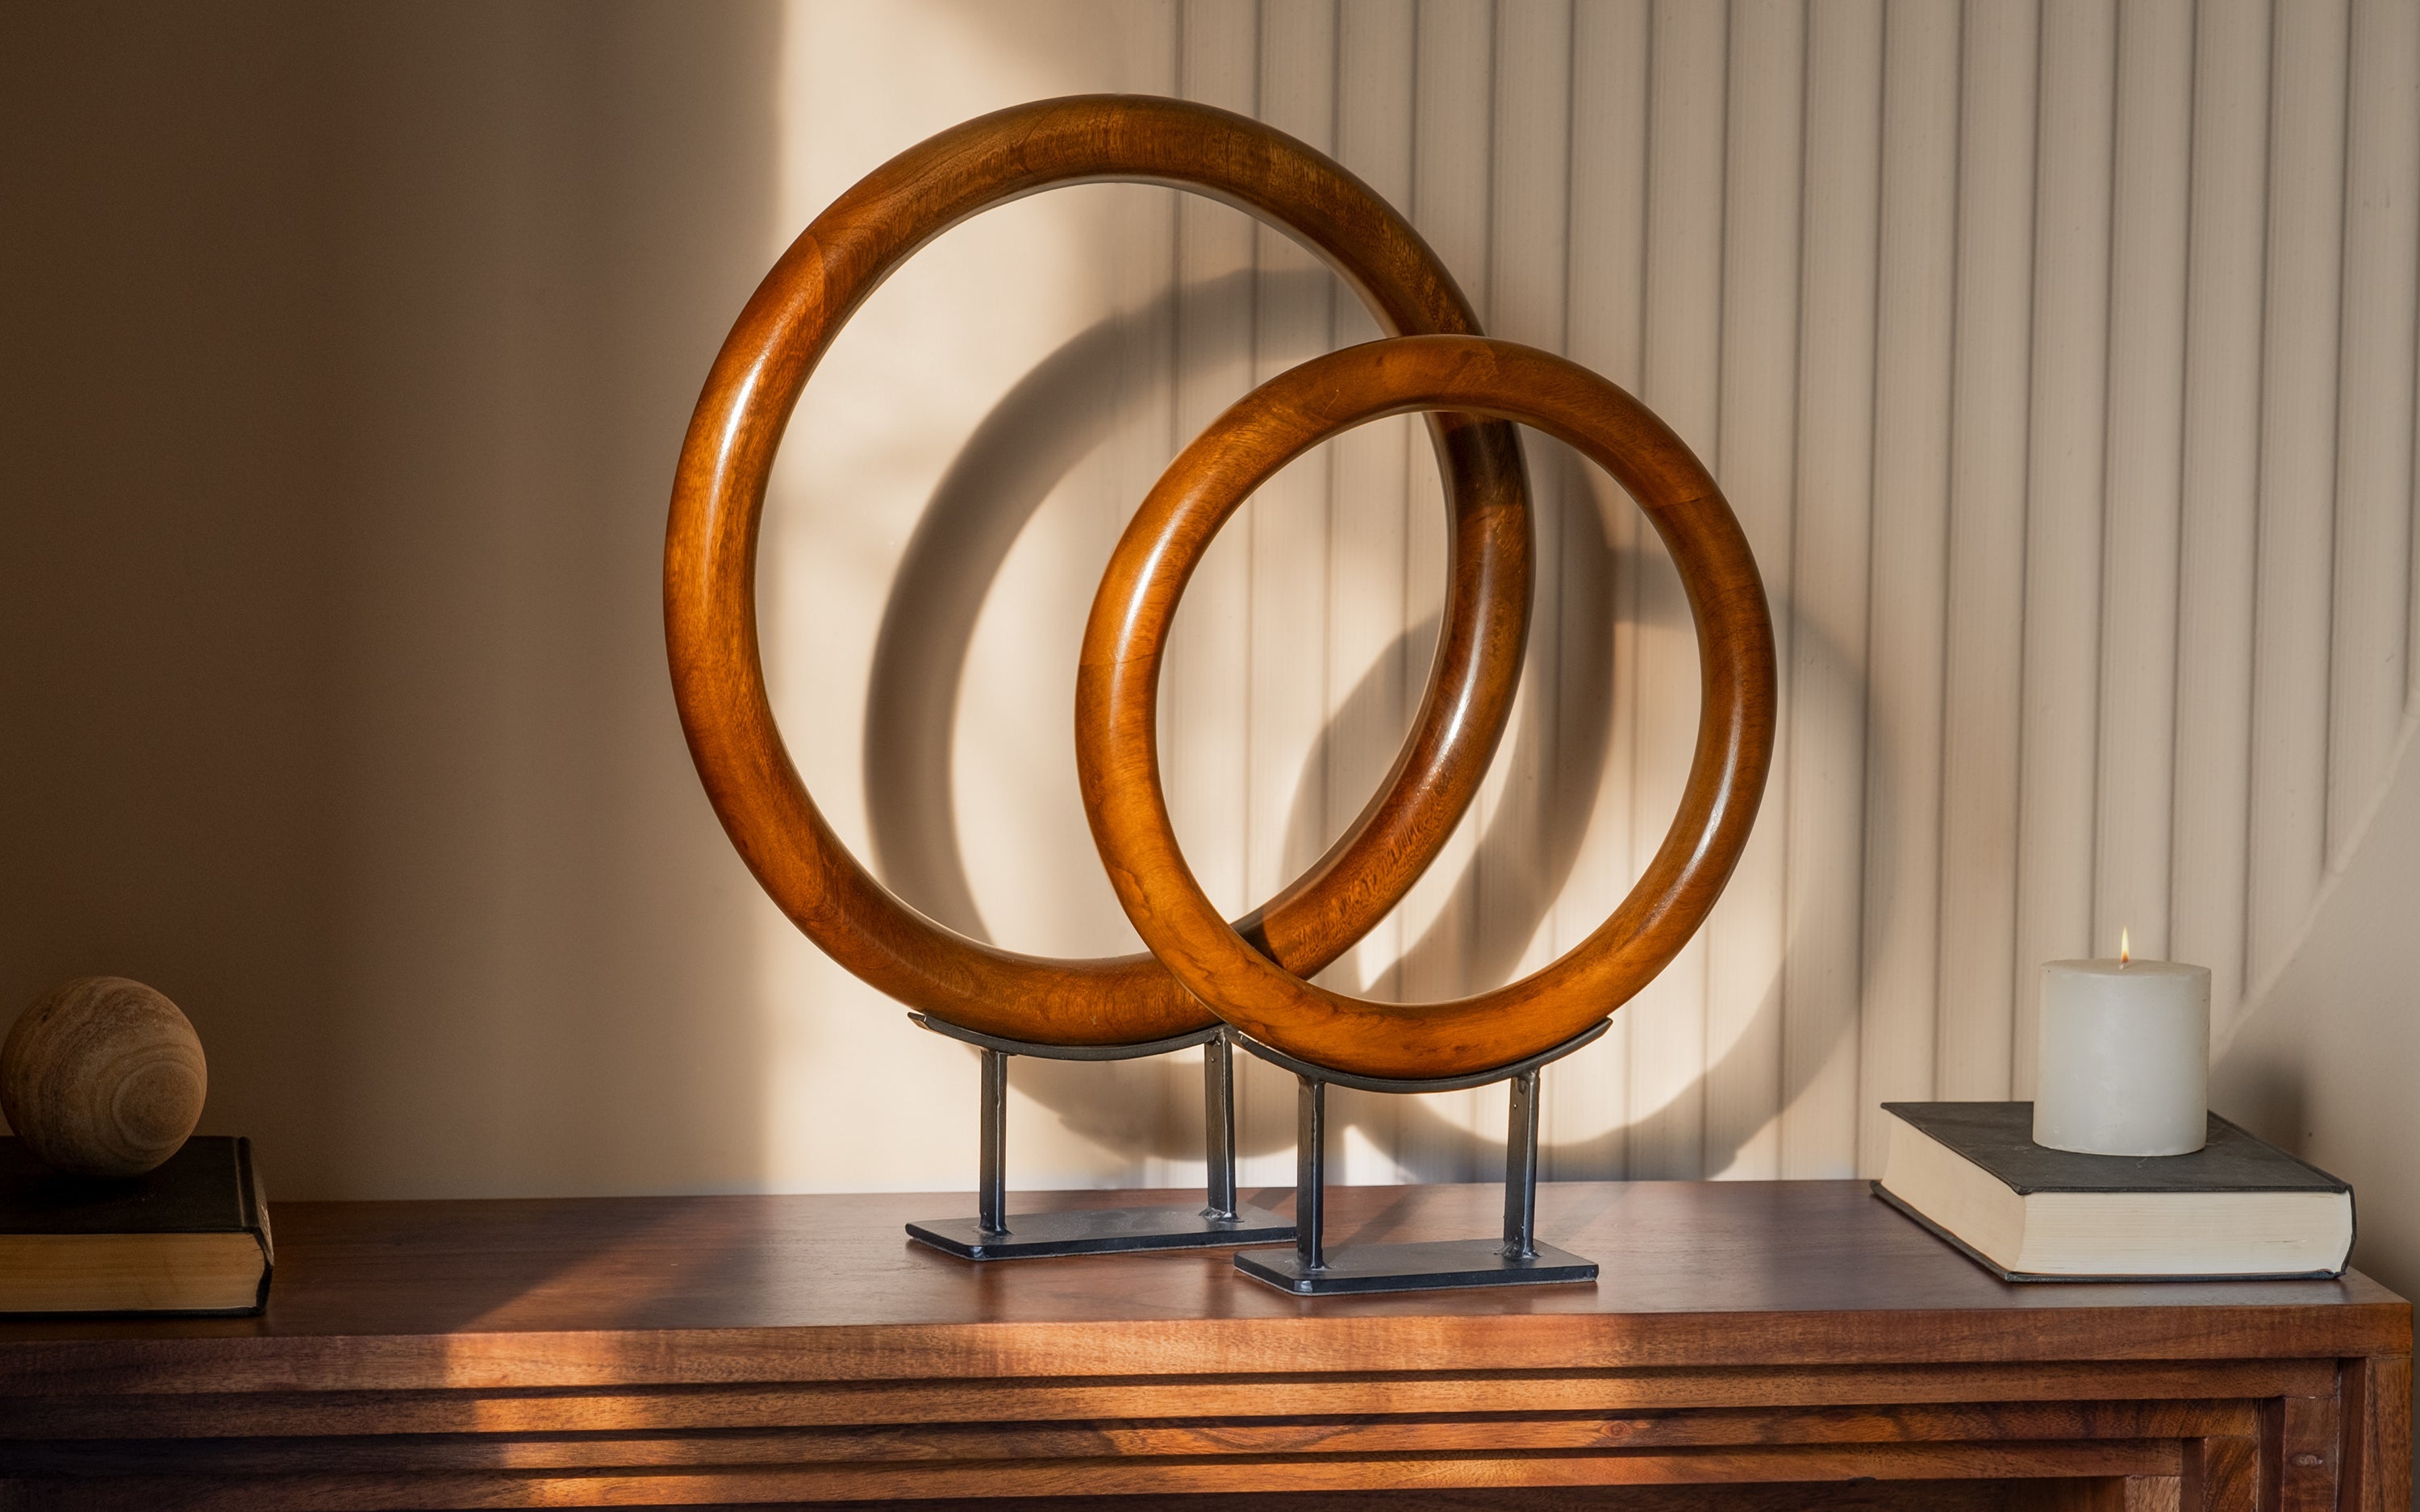 Elegant wooden crafts home decor, featuring concentric circular wooden sculptures on a modern desk.